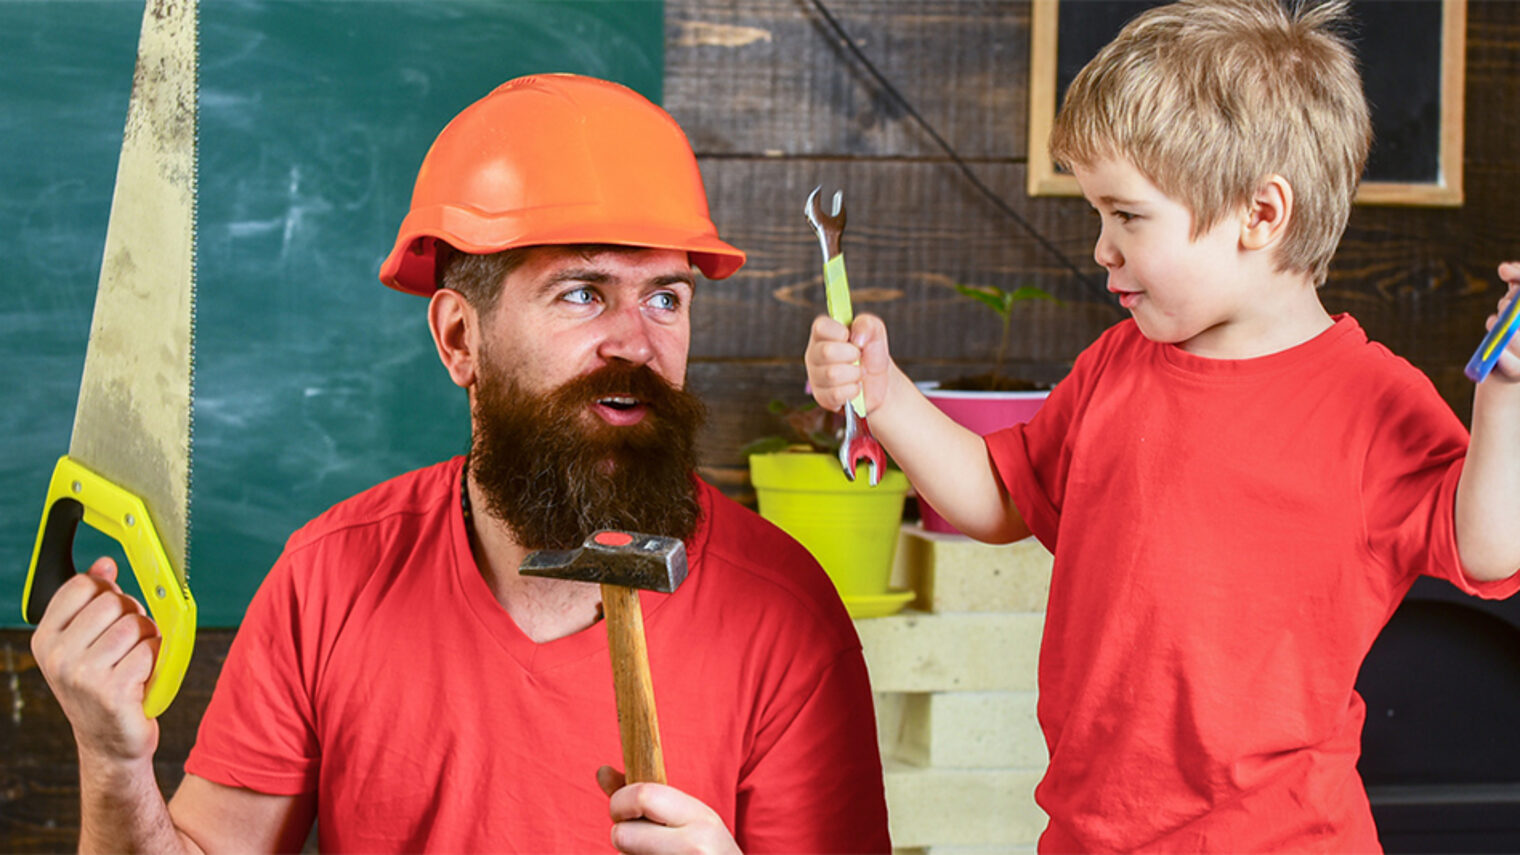 Fatherhood concept. Boy, child cheerful playing and learning to use tools with dad. Father, parent with beard in protective helmet teaching little son to use different tools in school workshop. Schlagwort(e): father, tool, educational, teacher, play, boy, game, different, toy, handyman, workshop, cheerful, kid, hard hat, work, helmet, toddler, protective, study, chalkboard, classroom, child, school, background, face, concept, learn, caucasian, little, baby, small, craft, kindergarten, fatherhood, man, beard, teach, fathers day, family, bearded, dad, son, build, use, masculine, hammer, screwdriver, parent, wrench, handsaw, father, tool, educational, teacher, play, boy, game, different, toy, handyman, workshop, cheerful, kid, hard hat, work, helmet, toddler, protective, study, chalkboard, classroom, child, school, background, face, concept, learn, caucasian, little, baby, small, craft, kindergarten, fatherhood, man, beard, teach, fathers day, family, bearded, dad, son, build, use, masculine, hammer, screwdriver, parent, wrench, handsaw